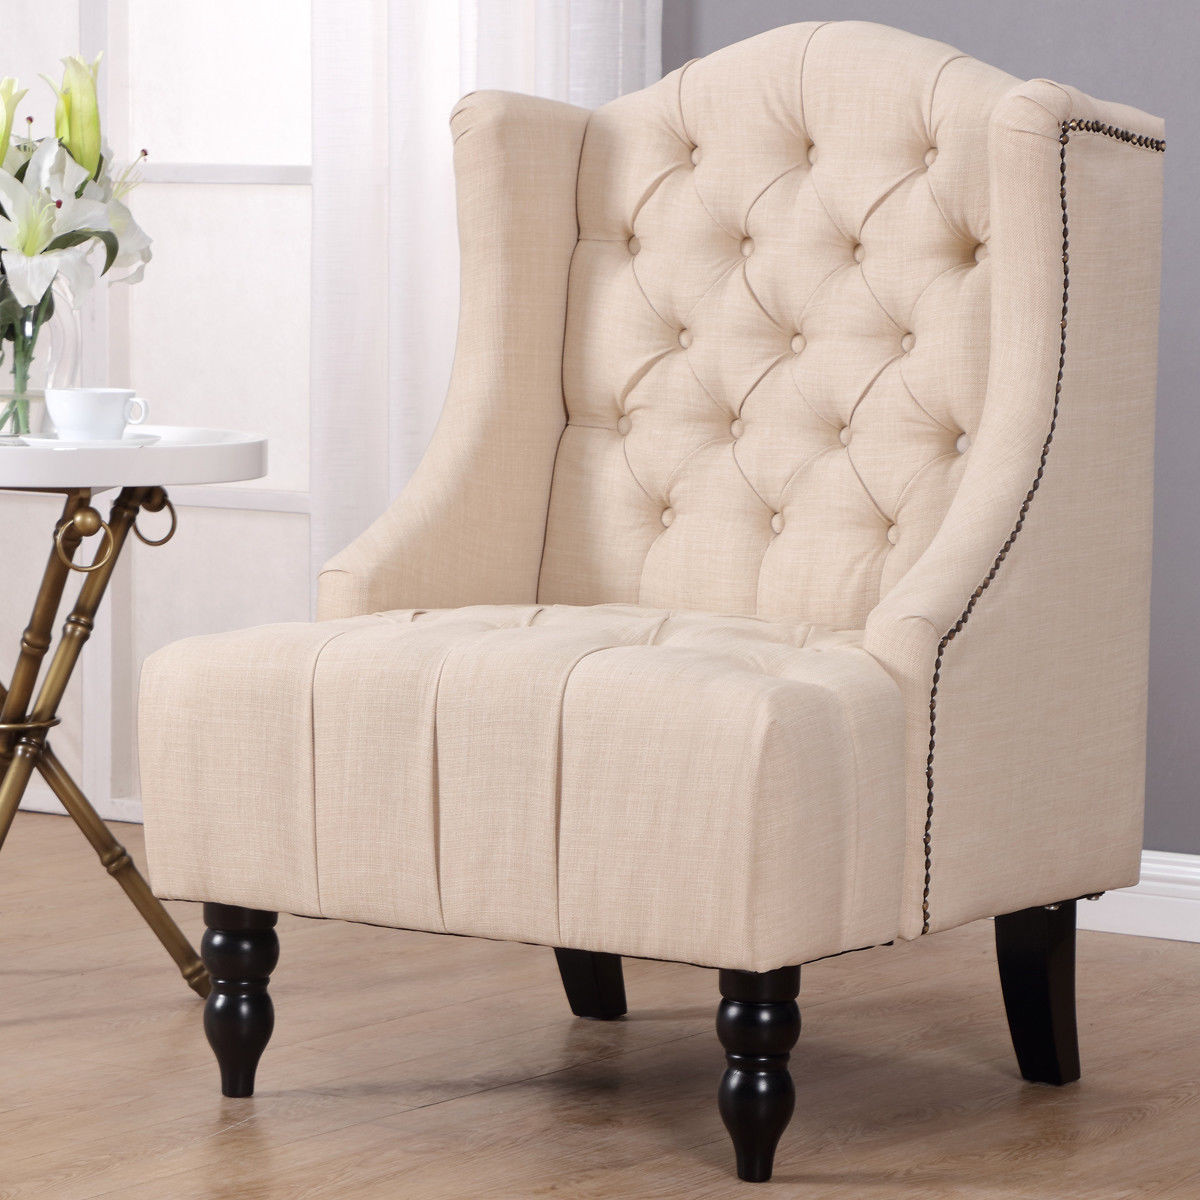 Wing Chairs For Living Room
 Giantex Modern Tall Wing Back Tufted Accent Armchair